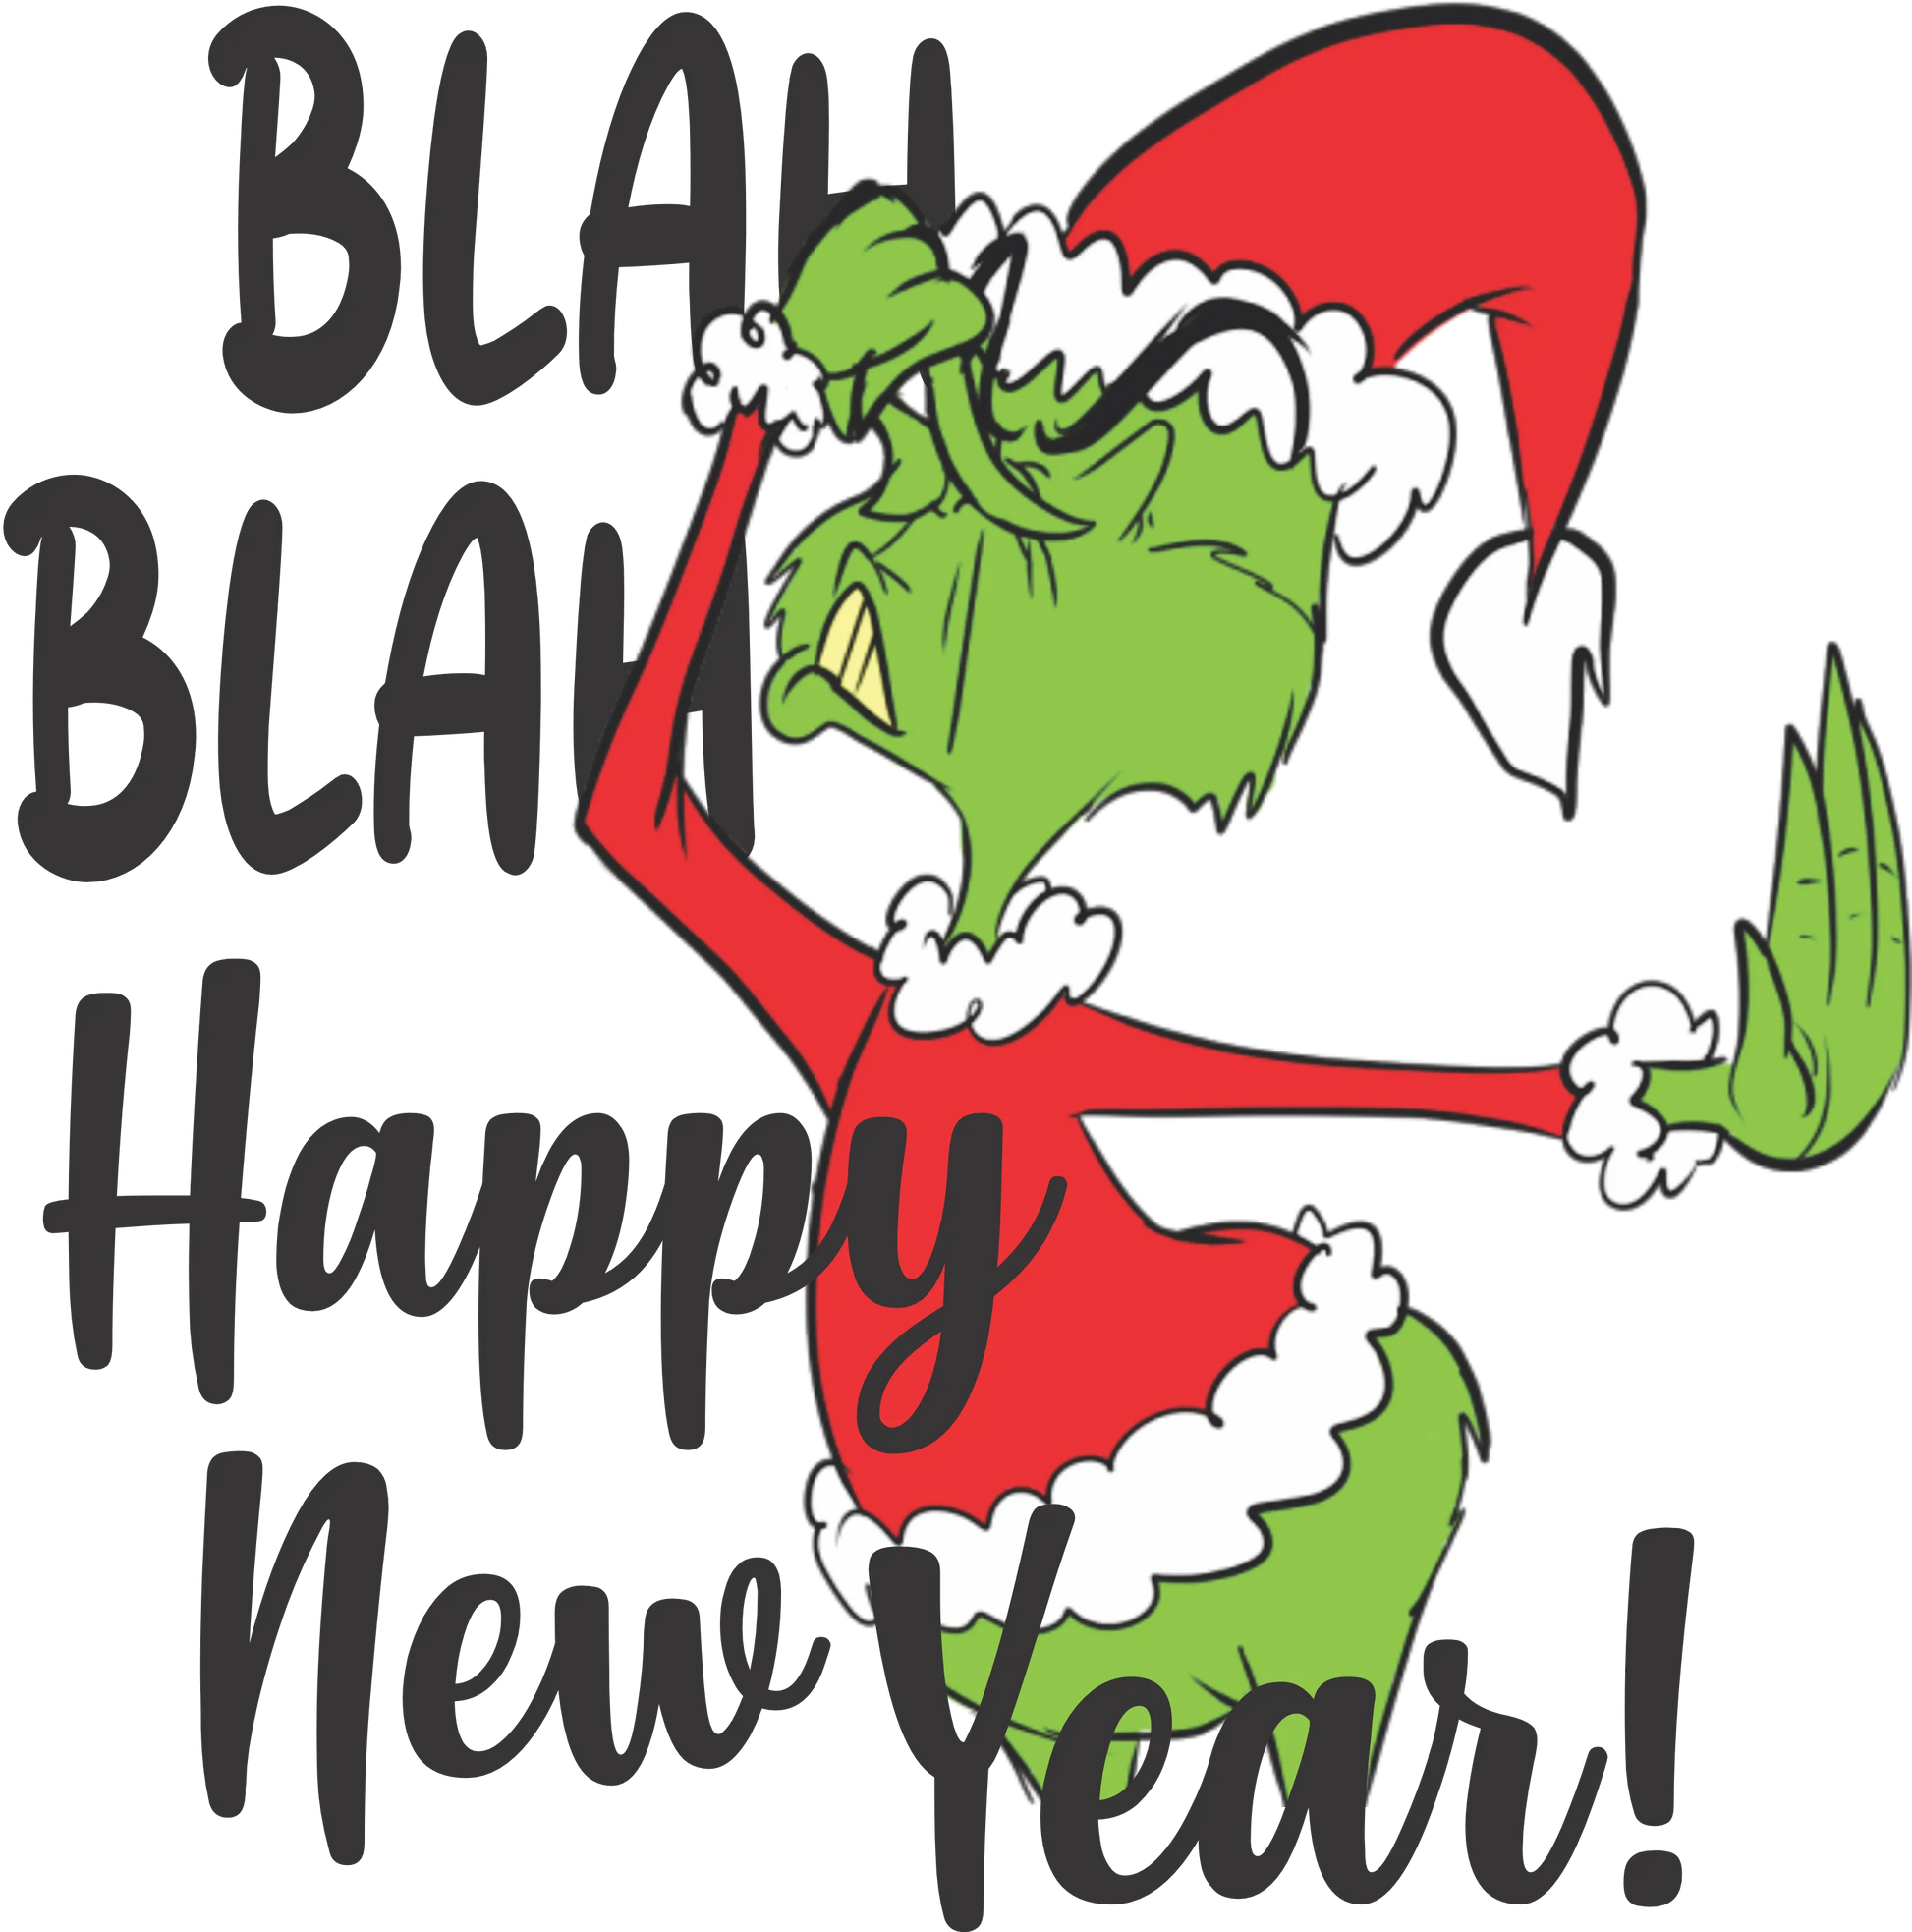 NY24-3 GRINCH BLAH HAPPY NEW YEAR, DTF Transfer, Apparel & Accessories, Ace DTF